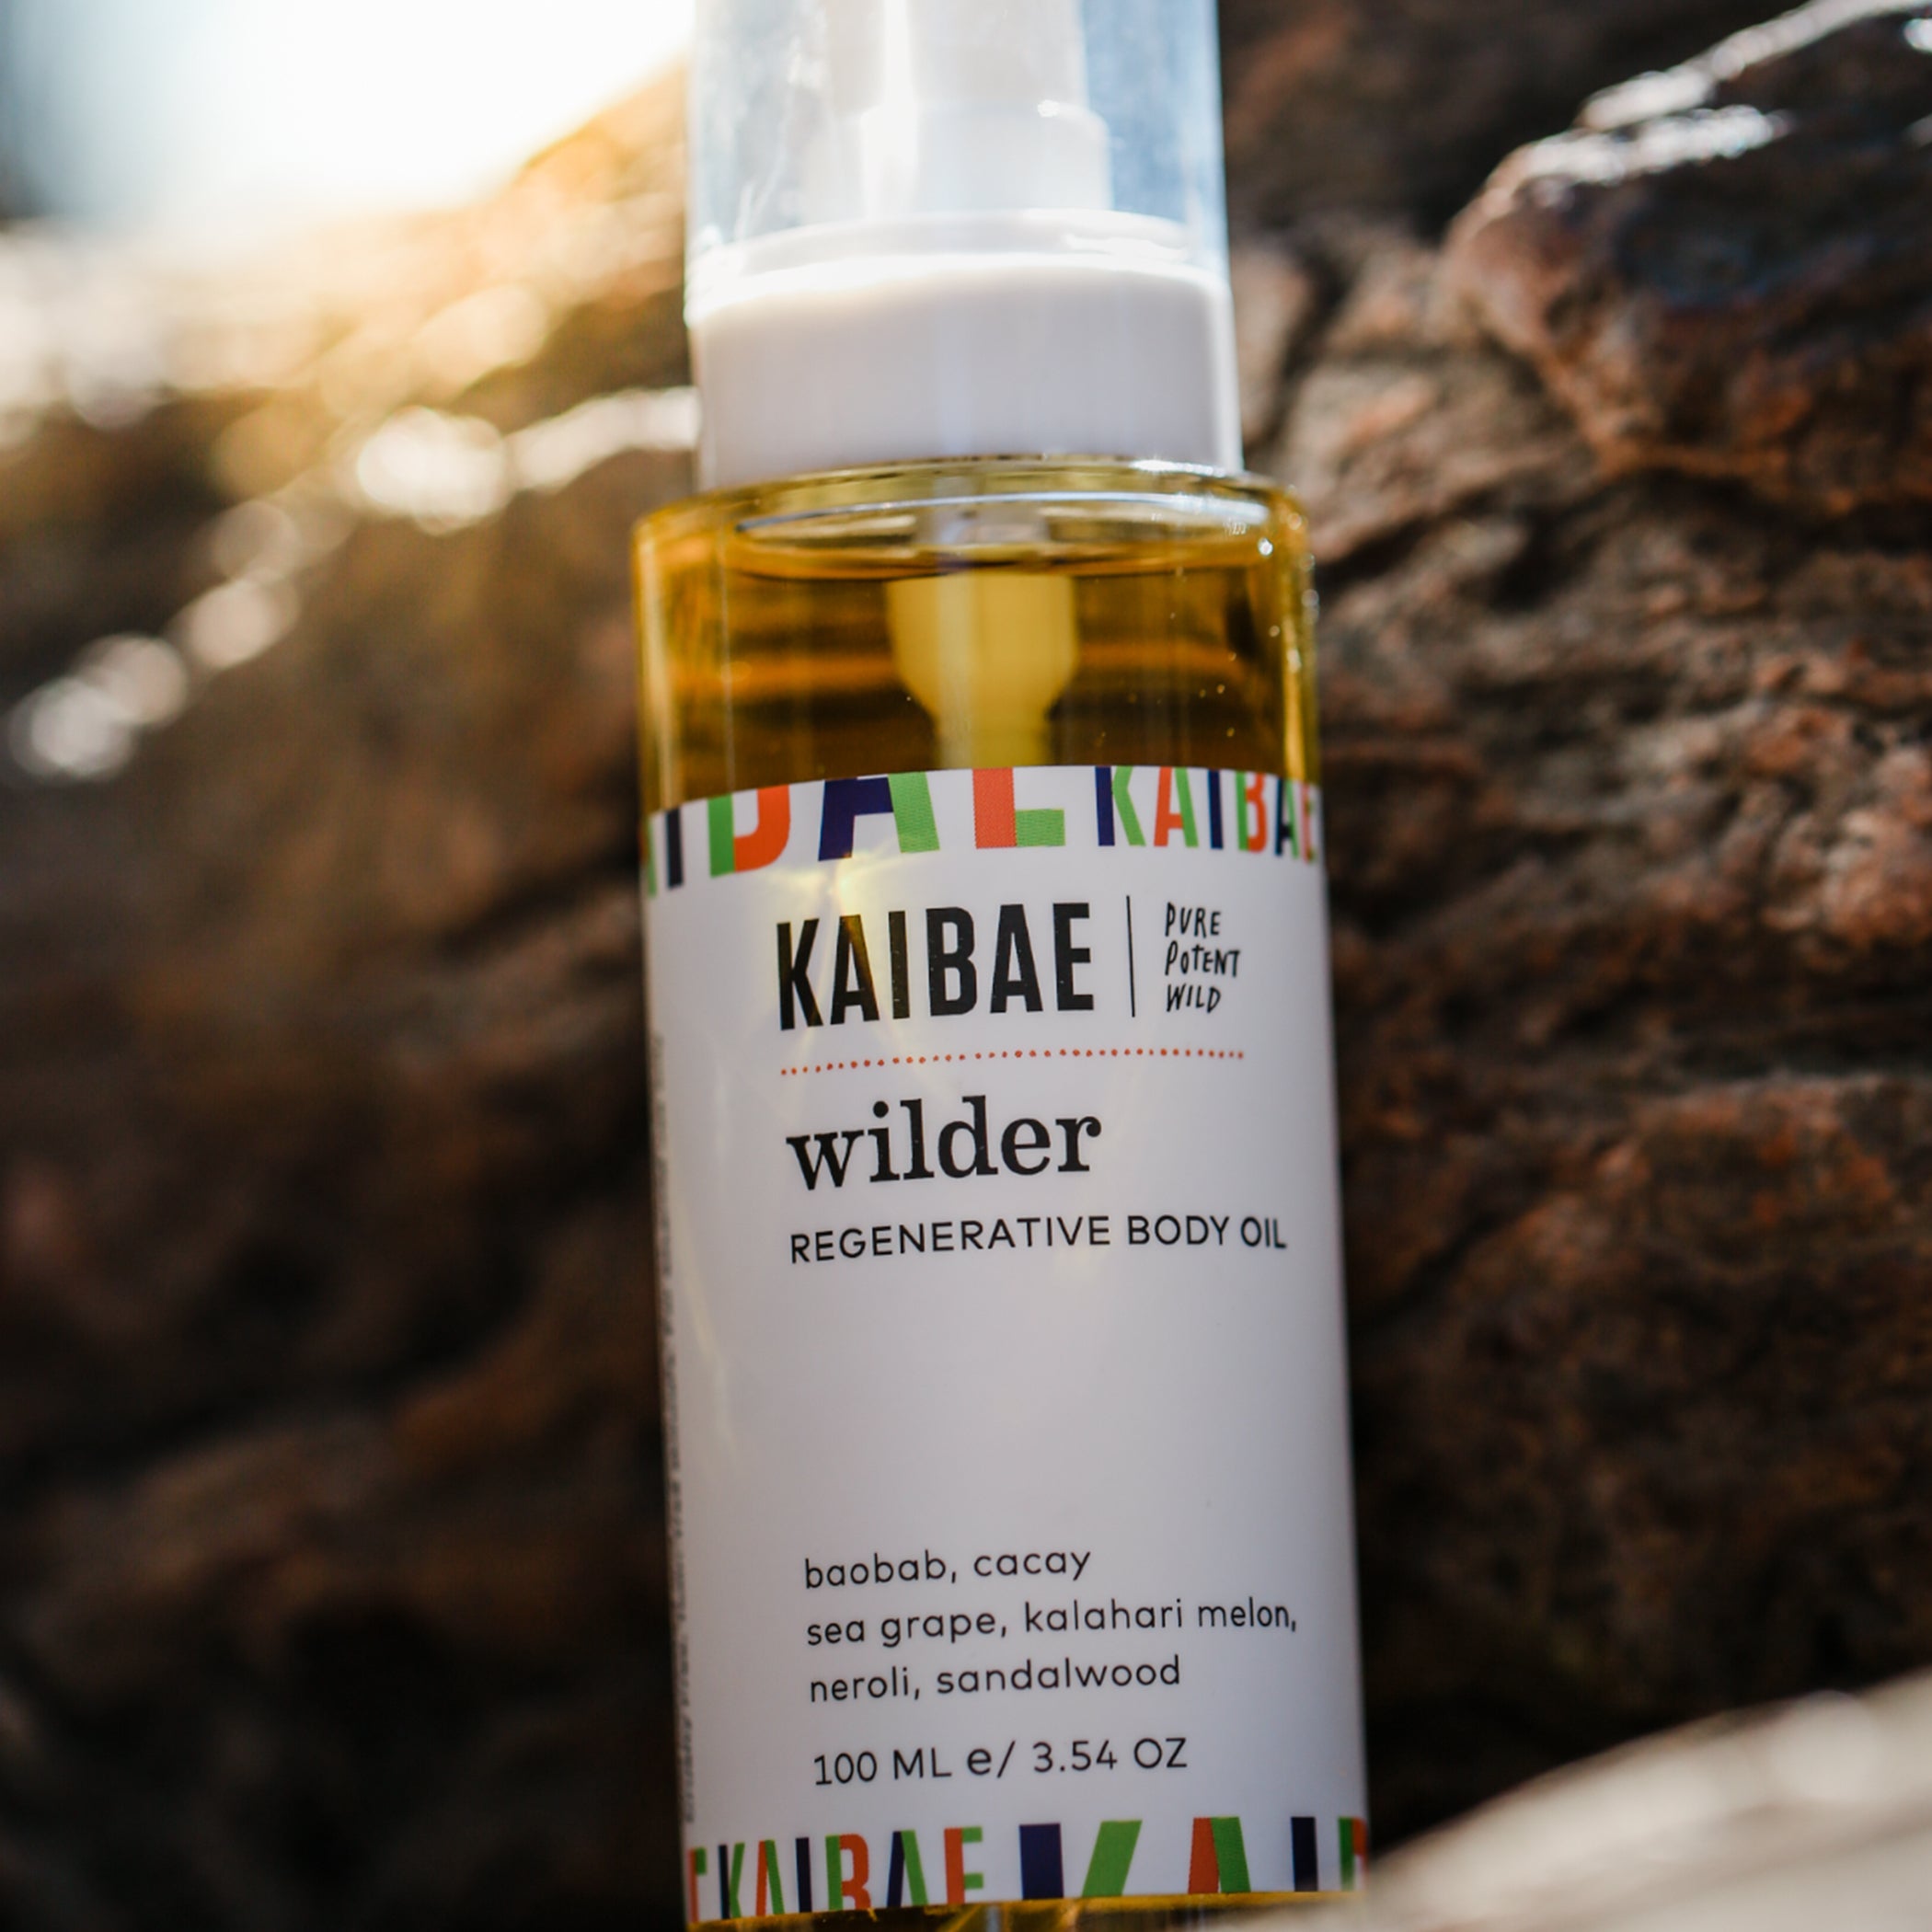 A bottle of kaibae "wilder" regenerative body oil, highlighted by the sunset, showing ingredients like baobab and cacay, seagrape, kalahari melon seed oil, neroli and sandalwood on its label, against a rocky background.